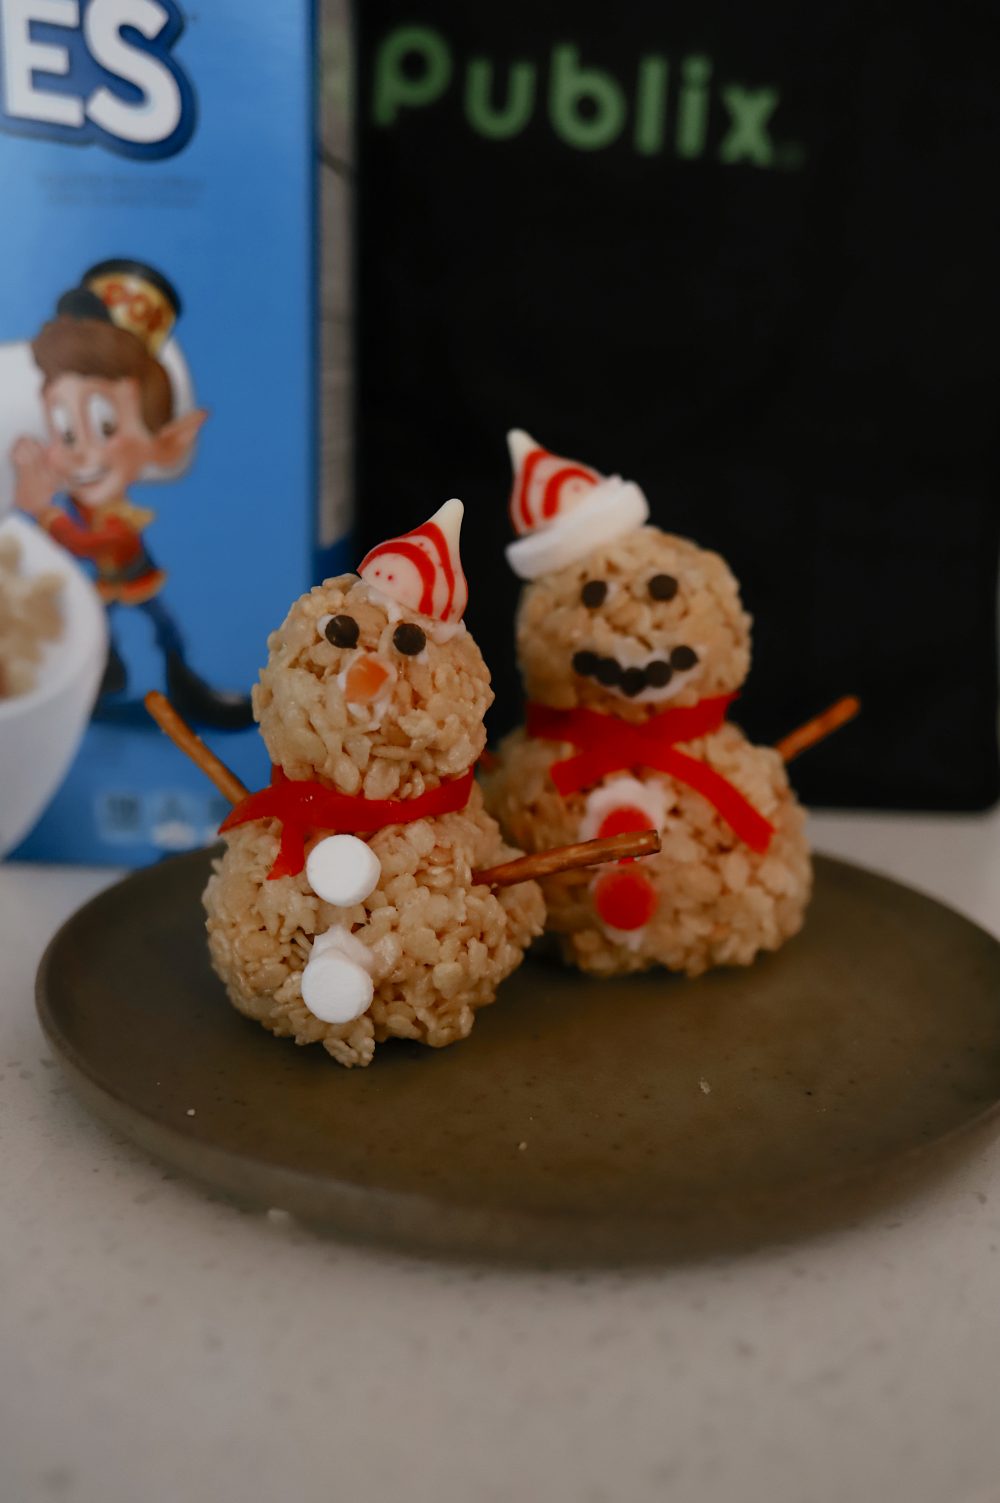 How to Make a Festive Rice Krispies Snowman Christmas Activity from mom and lifestyle blogger Tabitha Blue of Fresh Mommy Blog